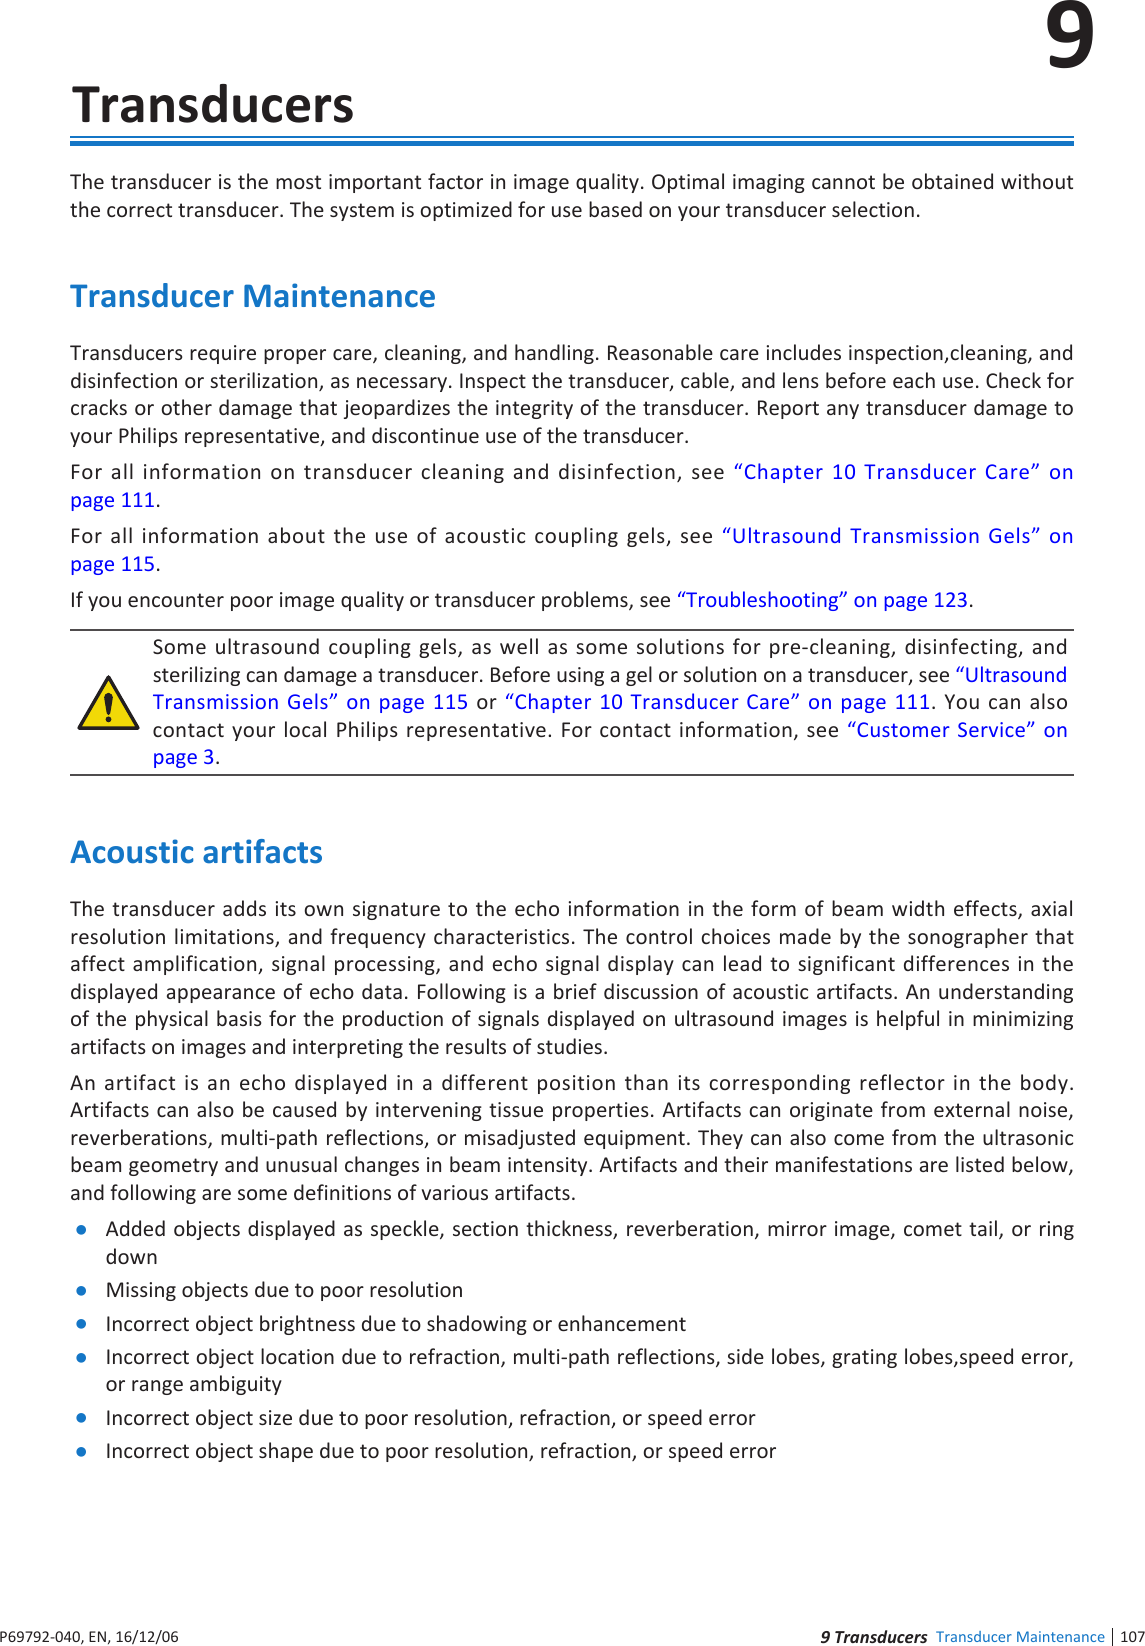 107 nde Transducer Maintenance9P6992-4, EN, 16/12/69  TransducersThe transducer is the most important factor in image quality Optimal imaging cannot be obtained without the correct transducer The system is optimized for use based on your transducer selectionTransducer MaintenanceTransducers require proper care, cleaning, and handling Reasonable care includes inspection,cleaning, and disinfection or sterilization, as necessary Inspect the transducer, cable, and lens before each use Check for cracks or other damage that jeopardizes the integrity of the transducer Report any transducer damage to your Philips representative, and discontinue use of the transducerFor all information on transducer cleaning and disinfection, see Chapter 1 Transducer Care on page 111For all information about the use of acoustic coupling gels, see Ultrasound Transmission Gels on page 11If you encounter poor image quality or transducer problems, see Troubleshooting on page 123Some ultrasound coupling gels, as well as some solutions for pre-cleaning, disinfecting, and sterilizing can damage a transducer Before using a gel or solution on a transducer, see Ultrasound Transmission Gels on page 11 or Chapter 1 Transducer Care on page 111 You can also contact your local Philips representative For contact information, see Customer Service on page 3Acoustic artifactsThe transducer adds its own signature to the echo information in the form of beam width effects, axial resolution limitations, and frequency characteristics The control choices made by the sonographer that affect amplification, signal processing, and echo signal display can lead to significant differences in the displayed appearance of echo data Following is a brief discussion of acoustic artifacts An understanding of the physical basis for the production of signals displayed on ultrasound images is helpful in minimizing artifacts on images and interpreting the results of studiesAn artifact is an echo displayed in a different position than its corresponding reflector in the body Artifacts can also be caused by intervening tissue properties Artifacts can originate from external noise, reverberations, multi-path reflections, or misadjusted equipment They can also come from the ultrasonic beam geometry and unusual changes in beam intensity Artifacts and their manifestations are listed below, and following are some definitions of various artifacts Added objects displayed as speckle, section thickness, reverberation, mirror image, comet tail, or ring down Missing objects due to poor resolution Incorrect object brightness due to shadowing or enhancement Incorrect object location due to refraction, multi-path reflections, side lobes, grating lobes,speed error, or range ambiguity Incorrect object size due to poor resolution, refraction, or speed error Incorrect object shape due to poor resolution, refraction, or speed error